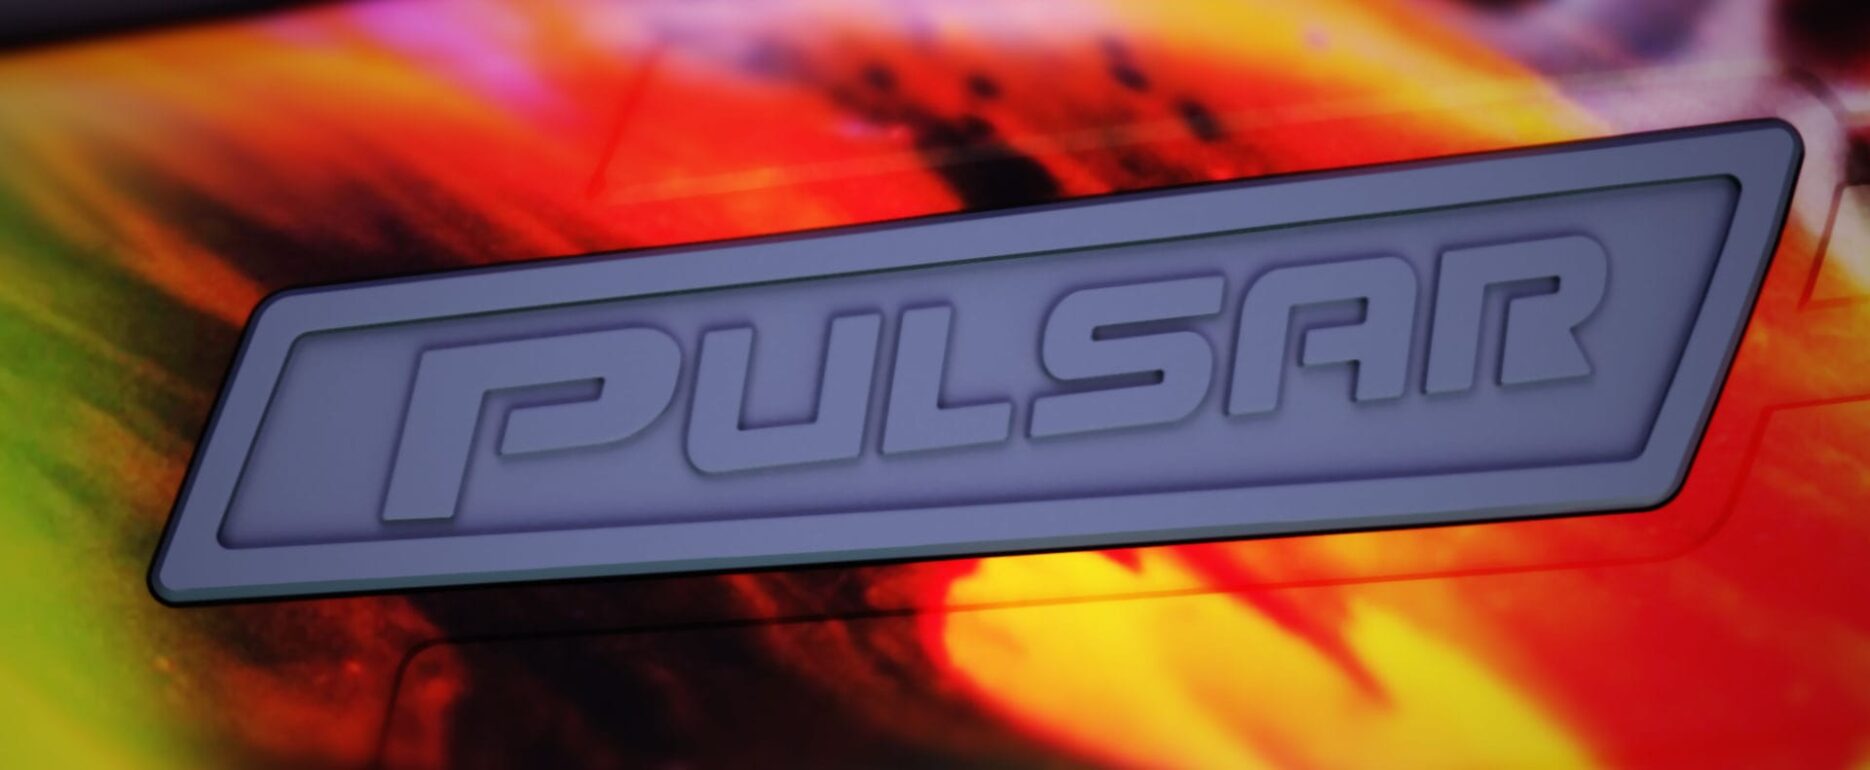 Hydro Strike Gel Bead Blasters Pulsar Pro Closeup Badge For Video Preview